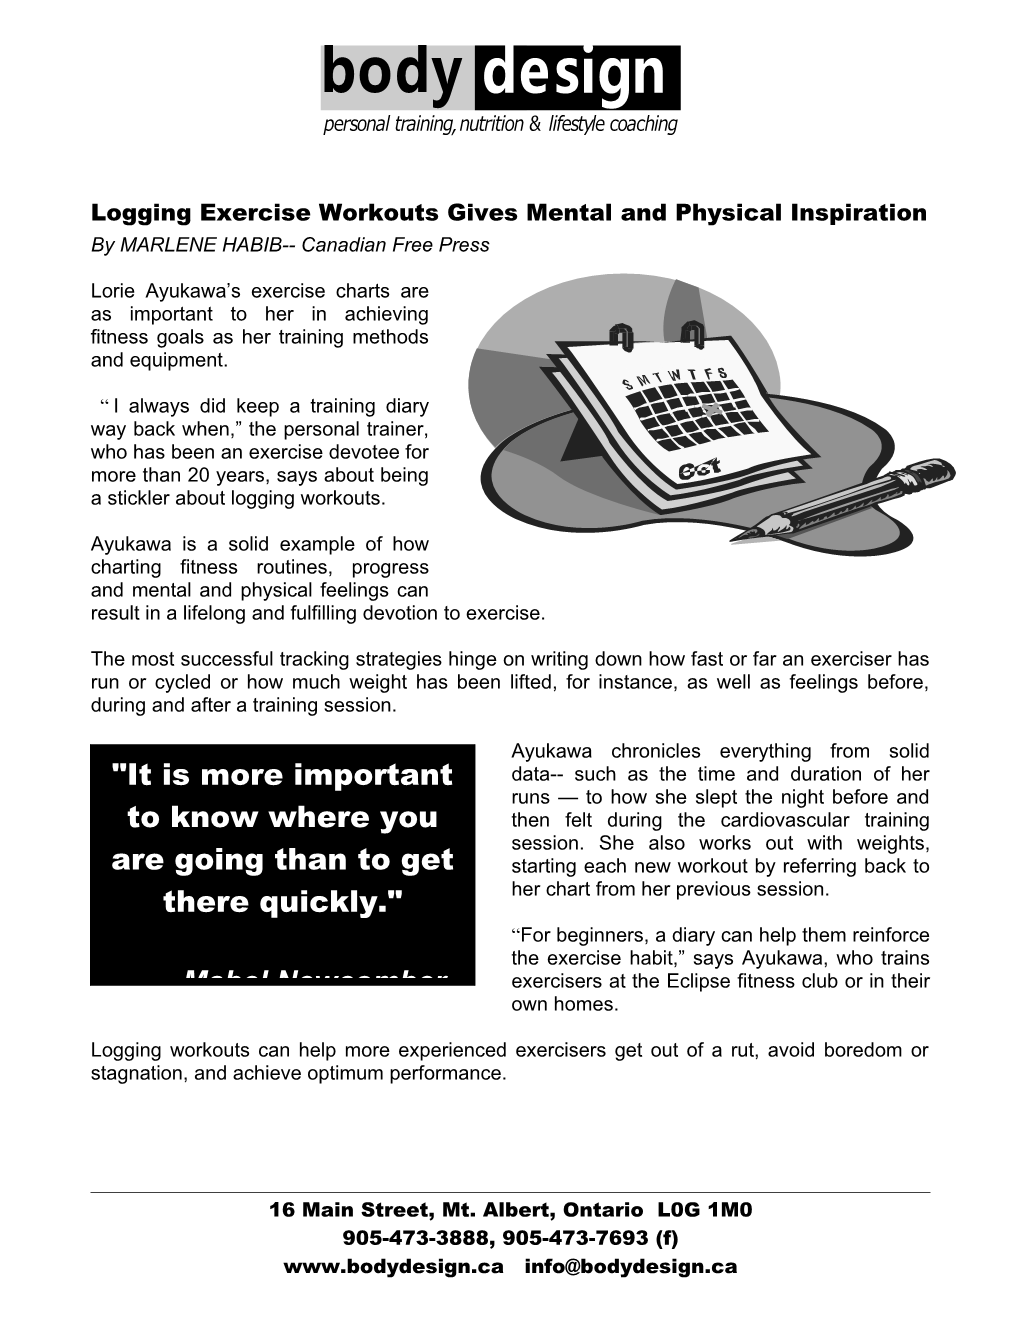 Logging Exercise Workouts Gives Mental and Physical Inspiration